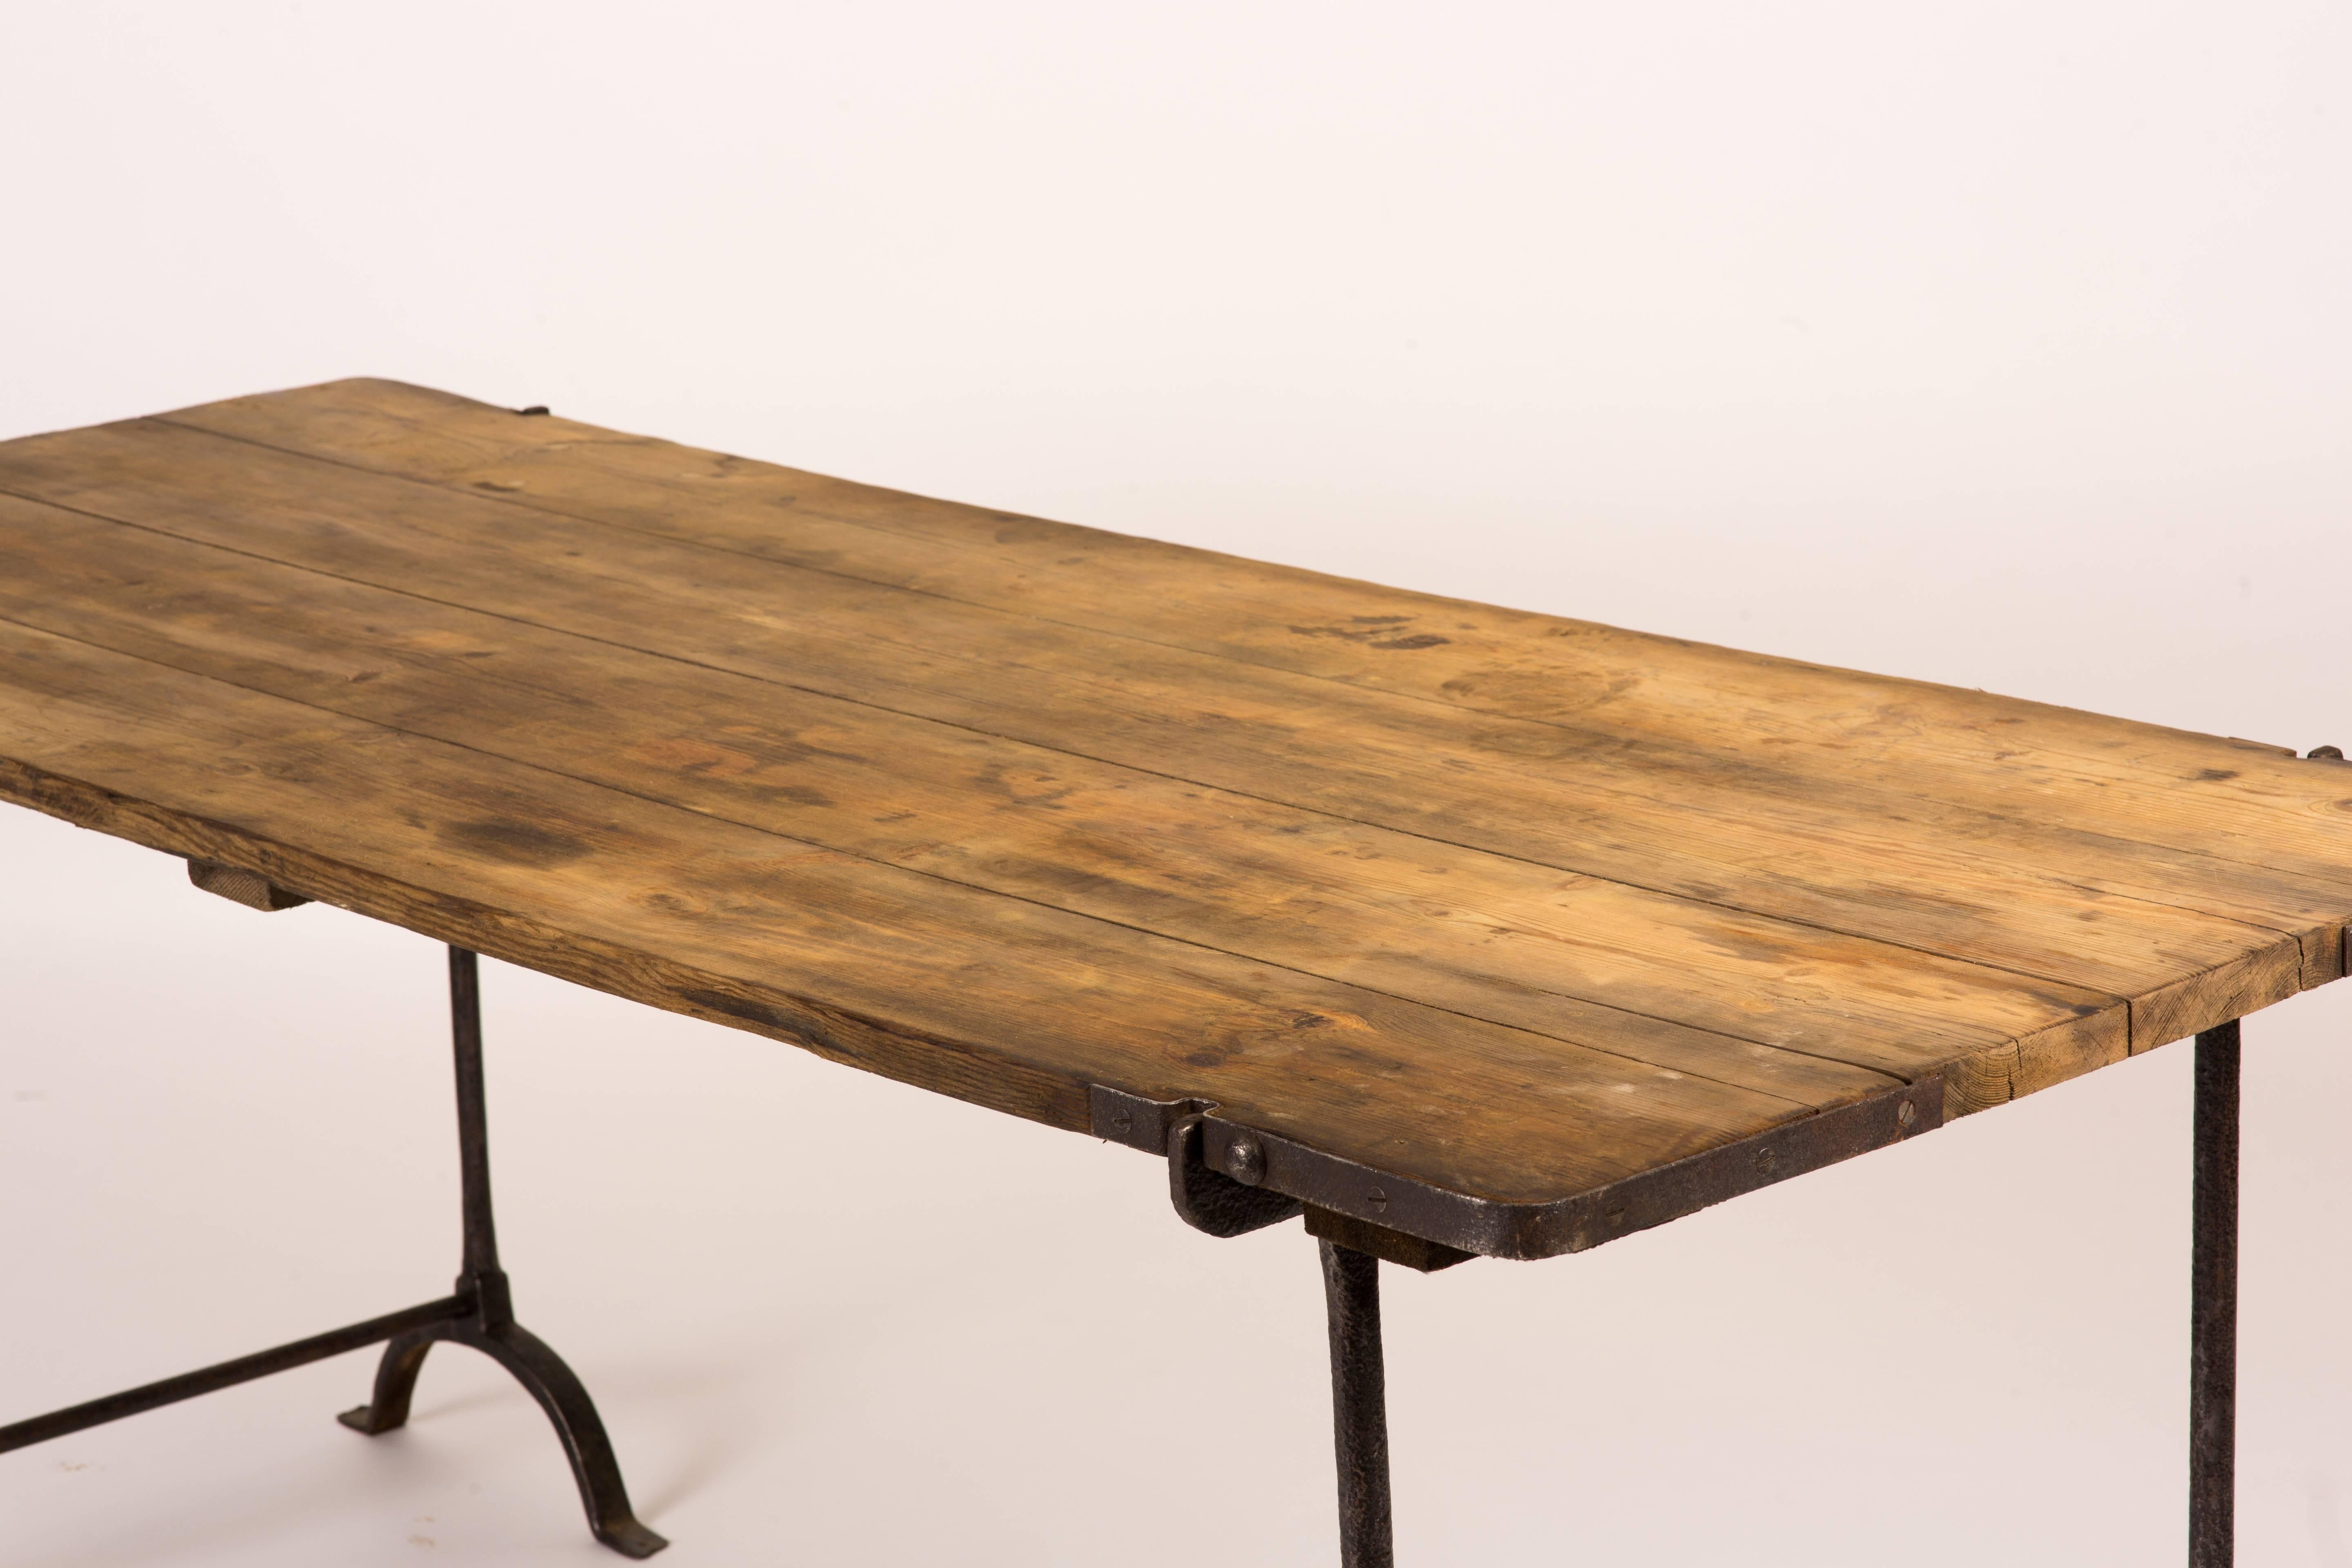 English Trestle Table with Iron Legs and Oakwood Top from England Circa 1850